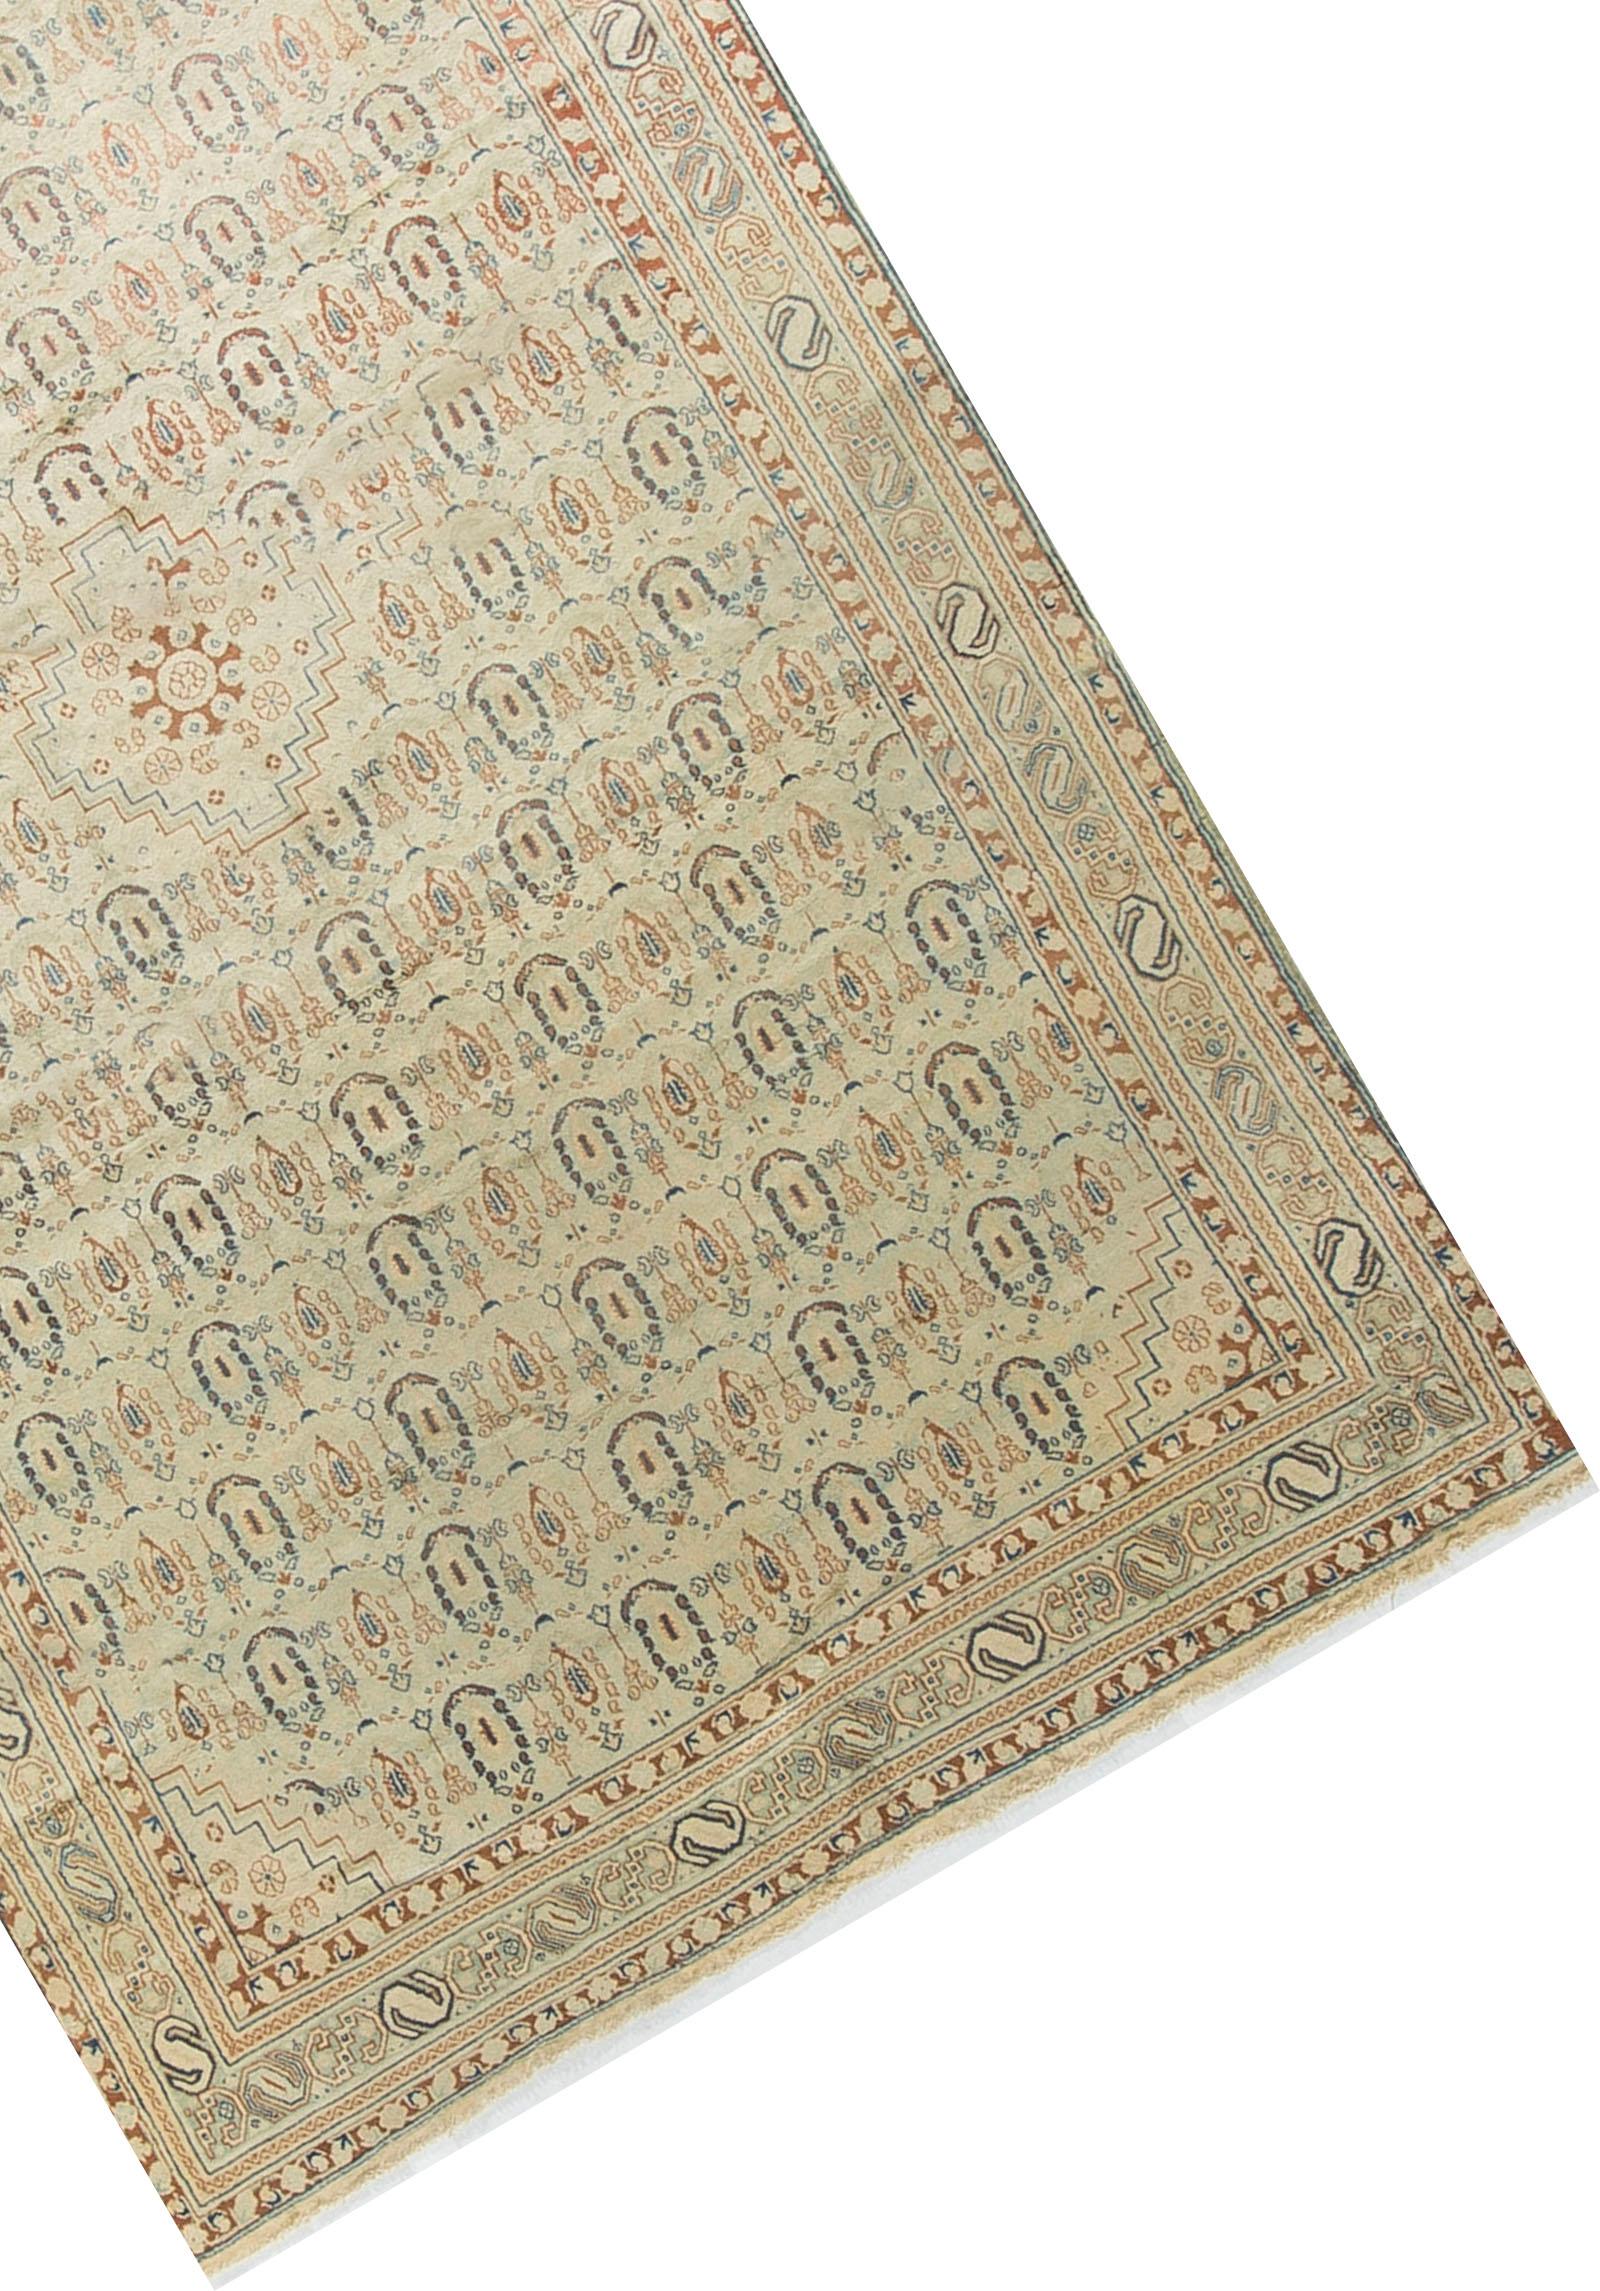 Indian Agra Rug Carpet Circa 1900 In Good Condition For Sale In Secaucus, NJ